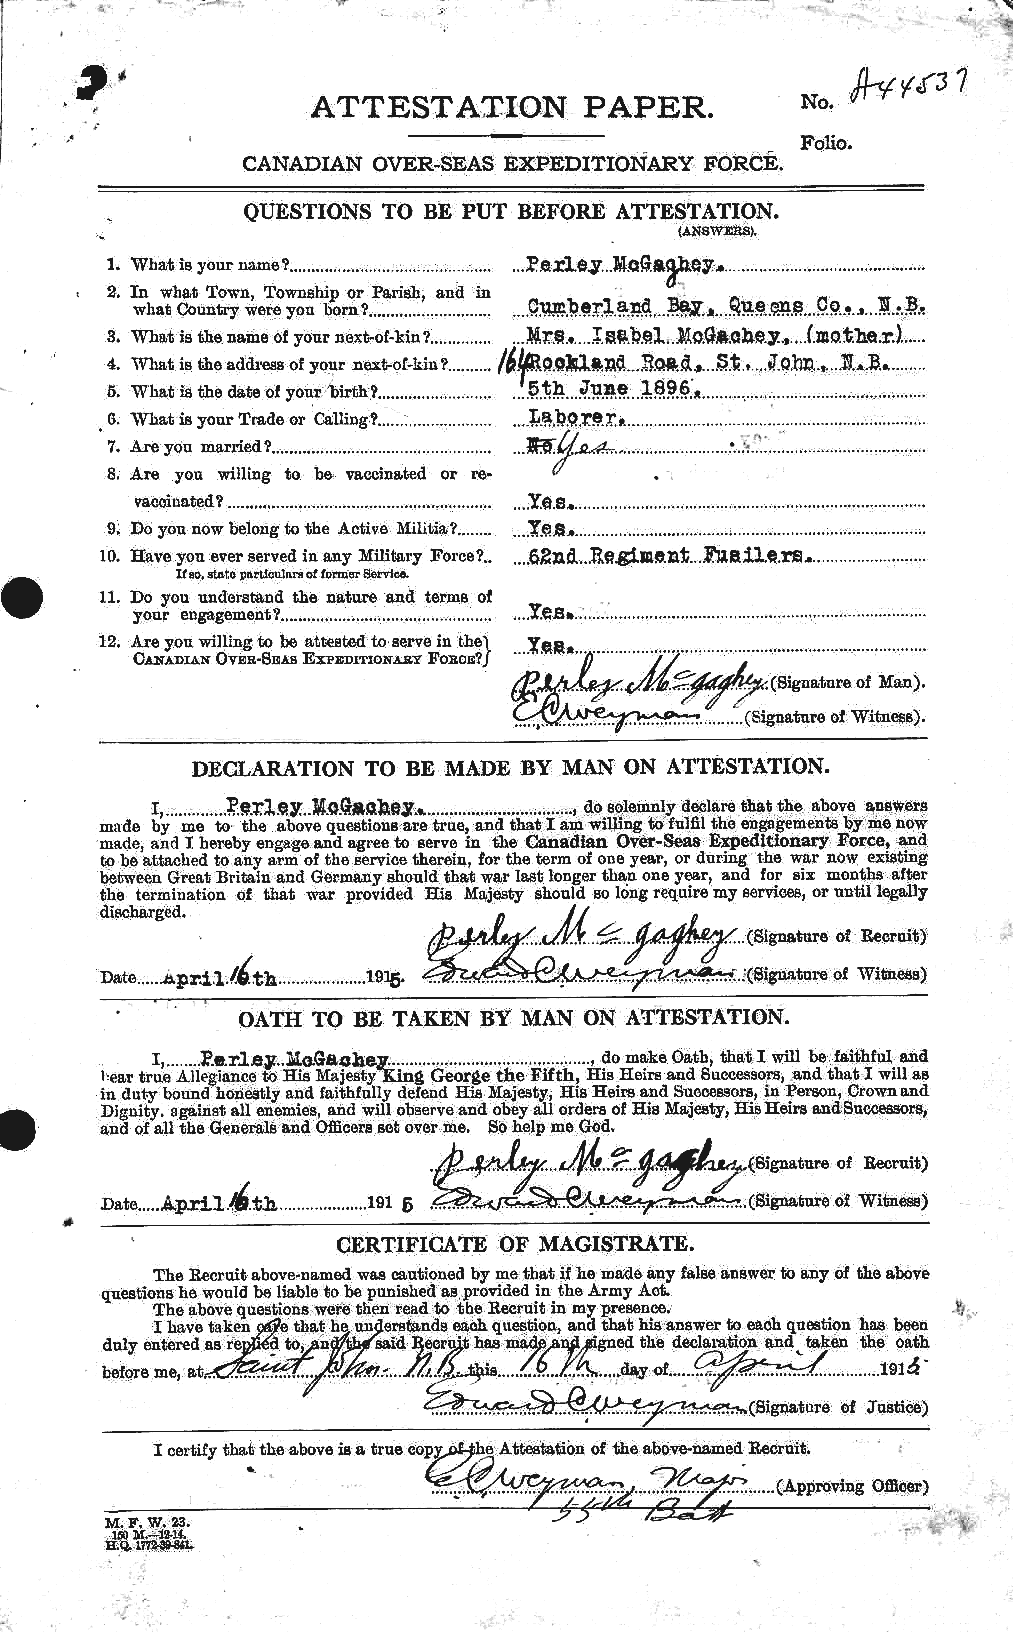 Personnel Records of the First World War - CEF 522648a